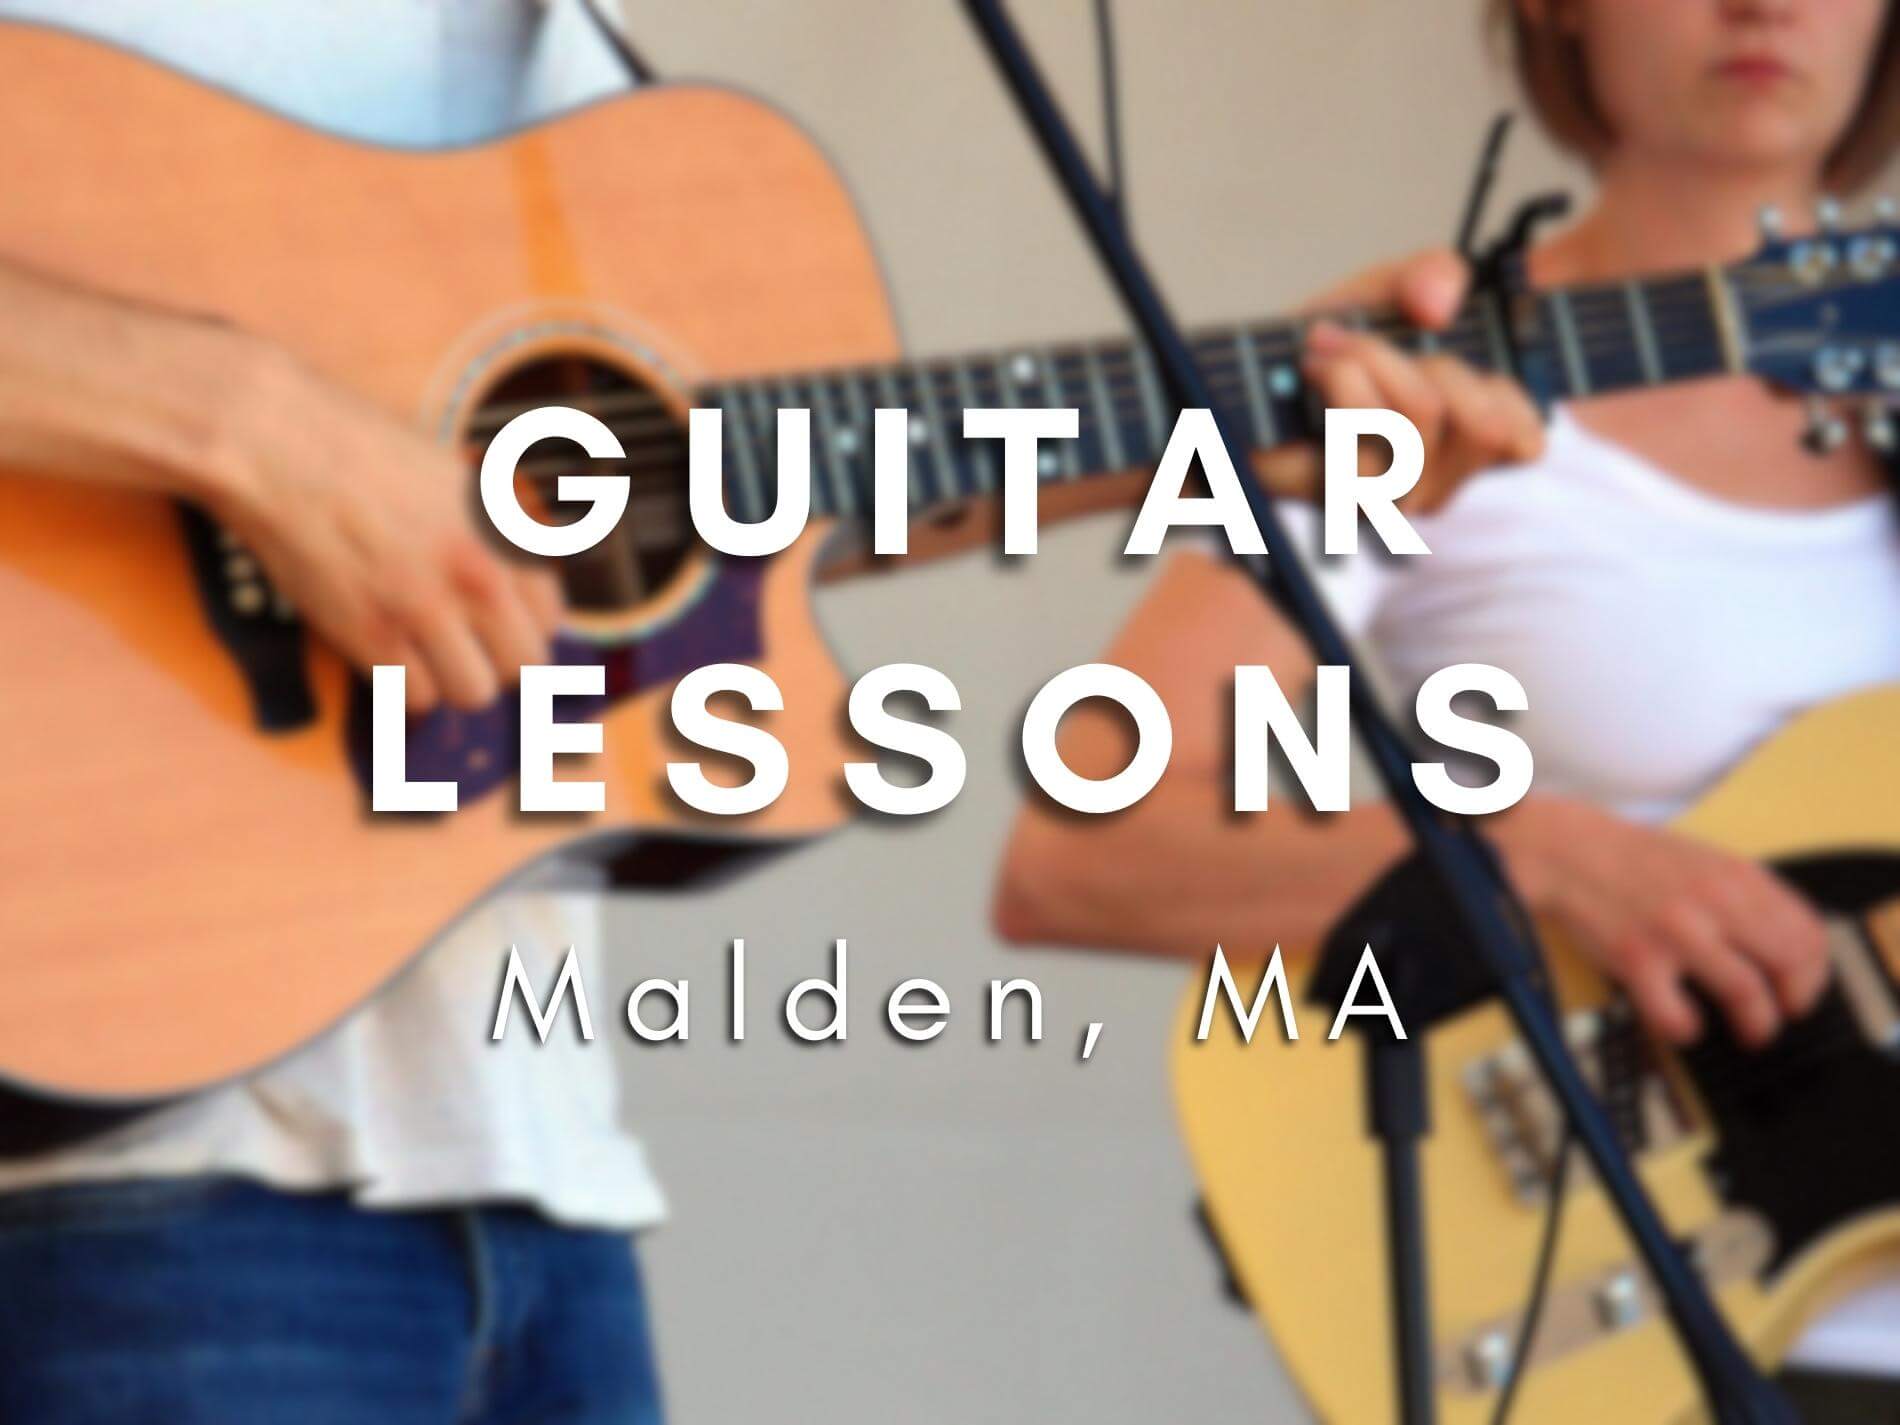 Guitar Lessons in Malden, Massachusetts: Learn to Play Guitar with Expert Instruction